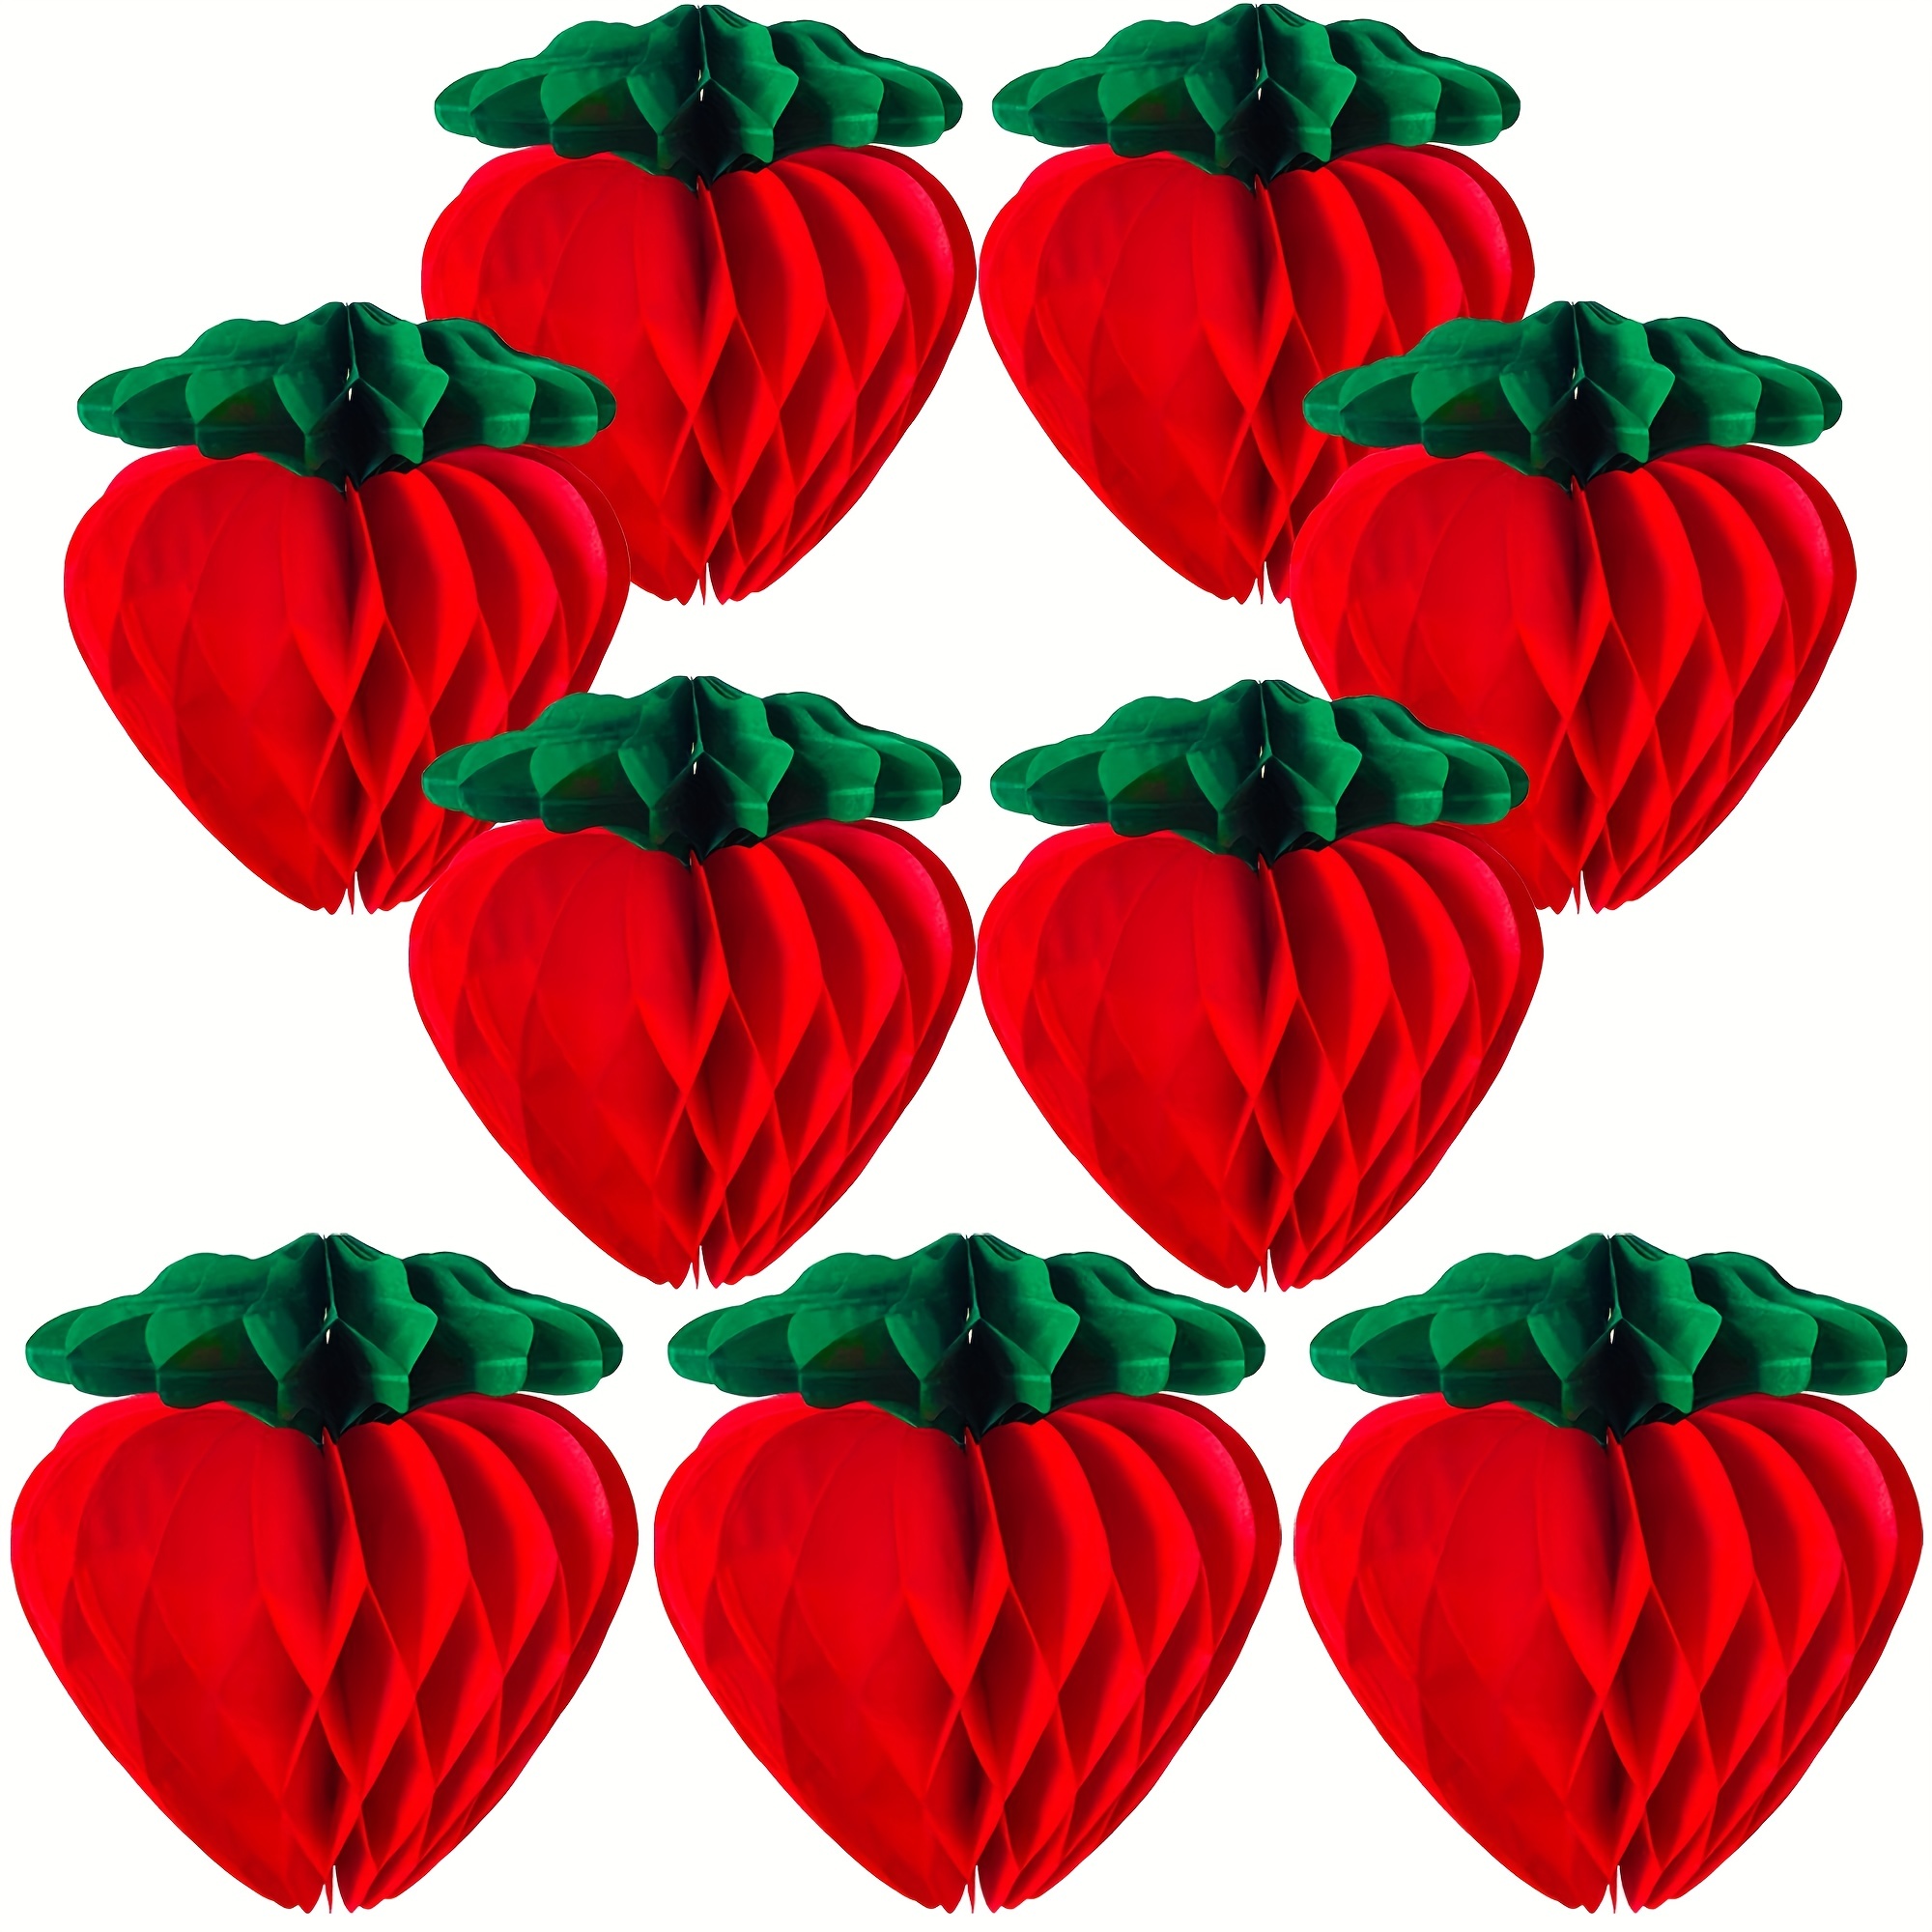 Wrapables Mini Honeycomb Ball Party Decorations for Weddings, Birthday Parties, Baby Showers and Nursery Decor (Set of 20), 1 inch, Red